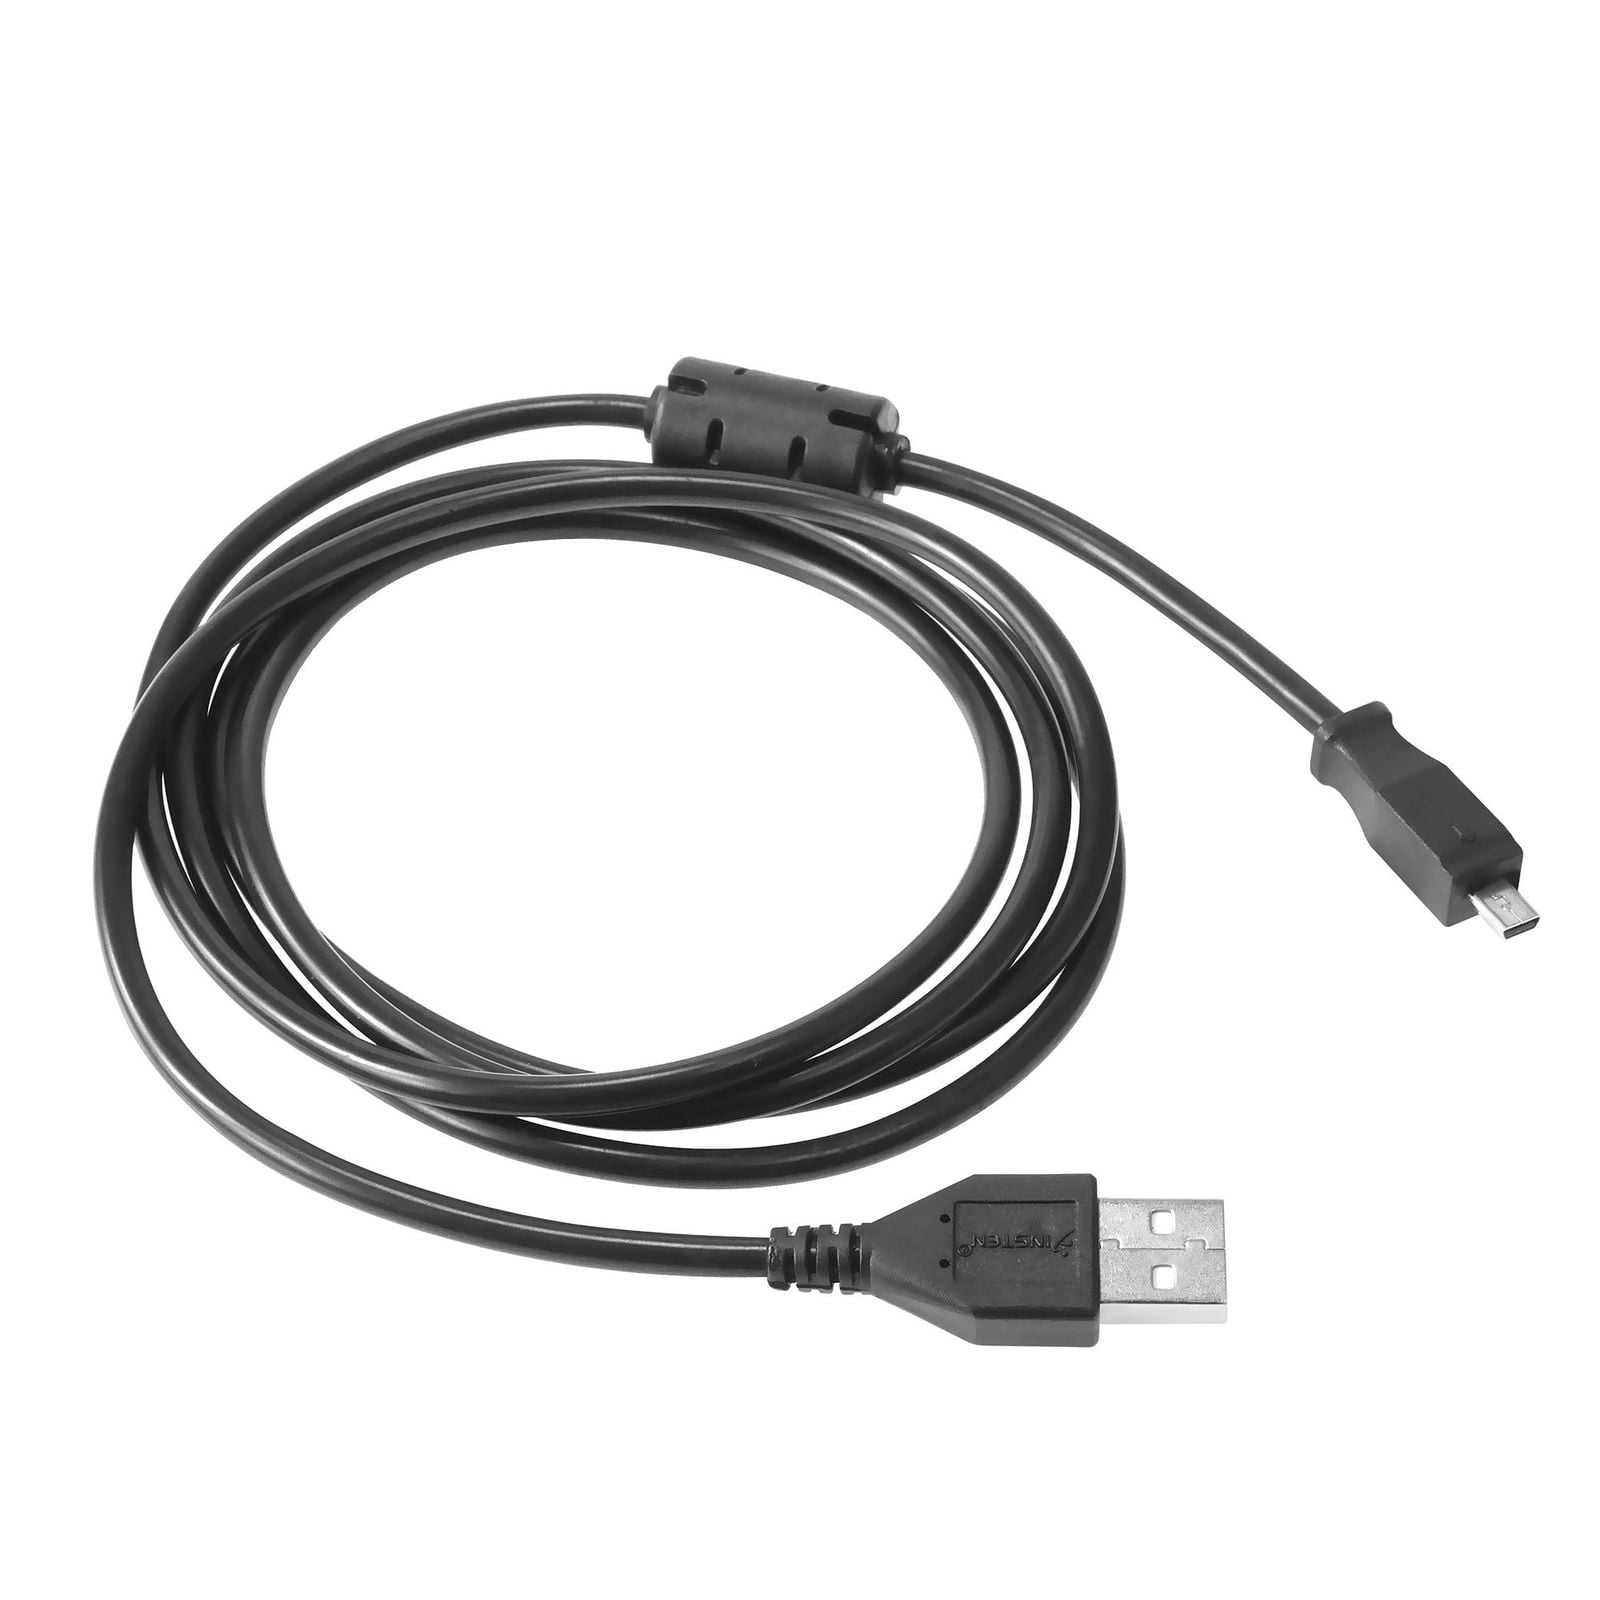 Compatible Models Listed in The Description Below MPF Products USB U8 U-8 Cable Lead Cord Replacement Compatible with Select Kodak Easyshare Digital Cameras 